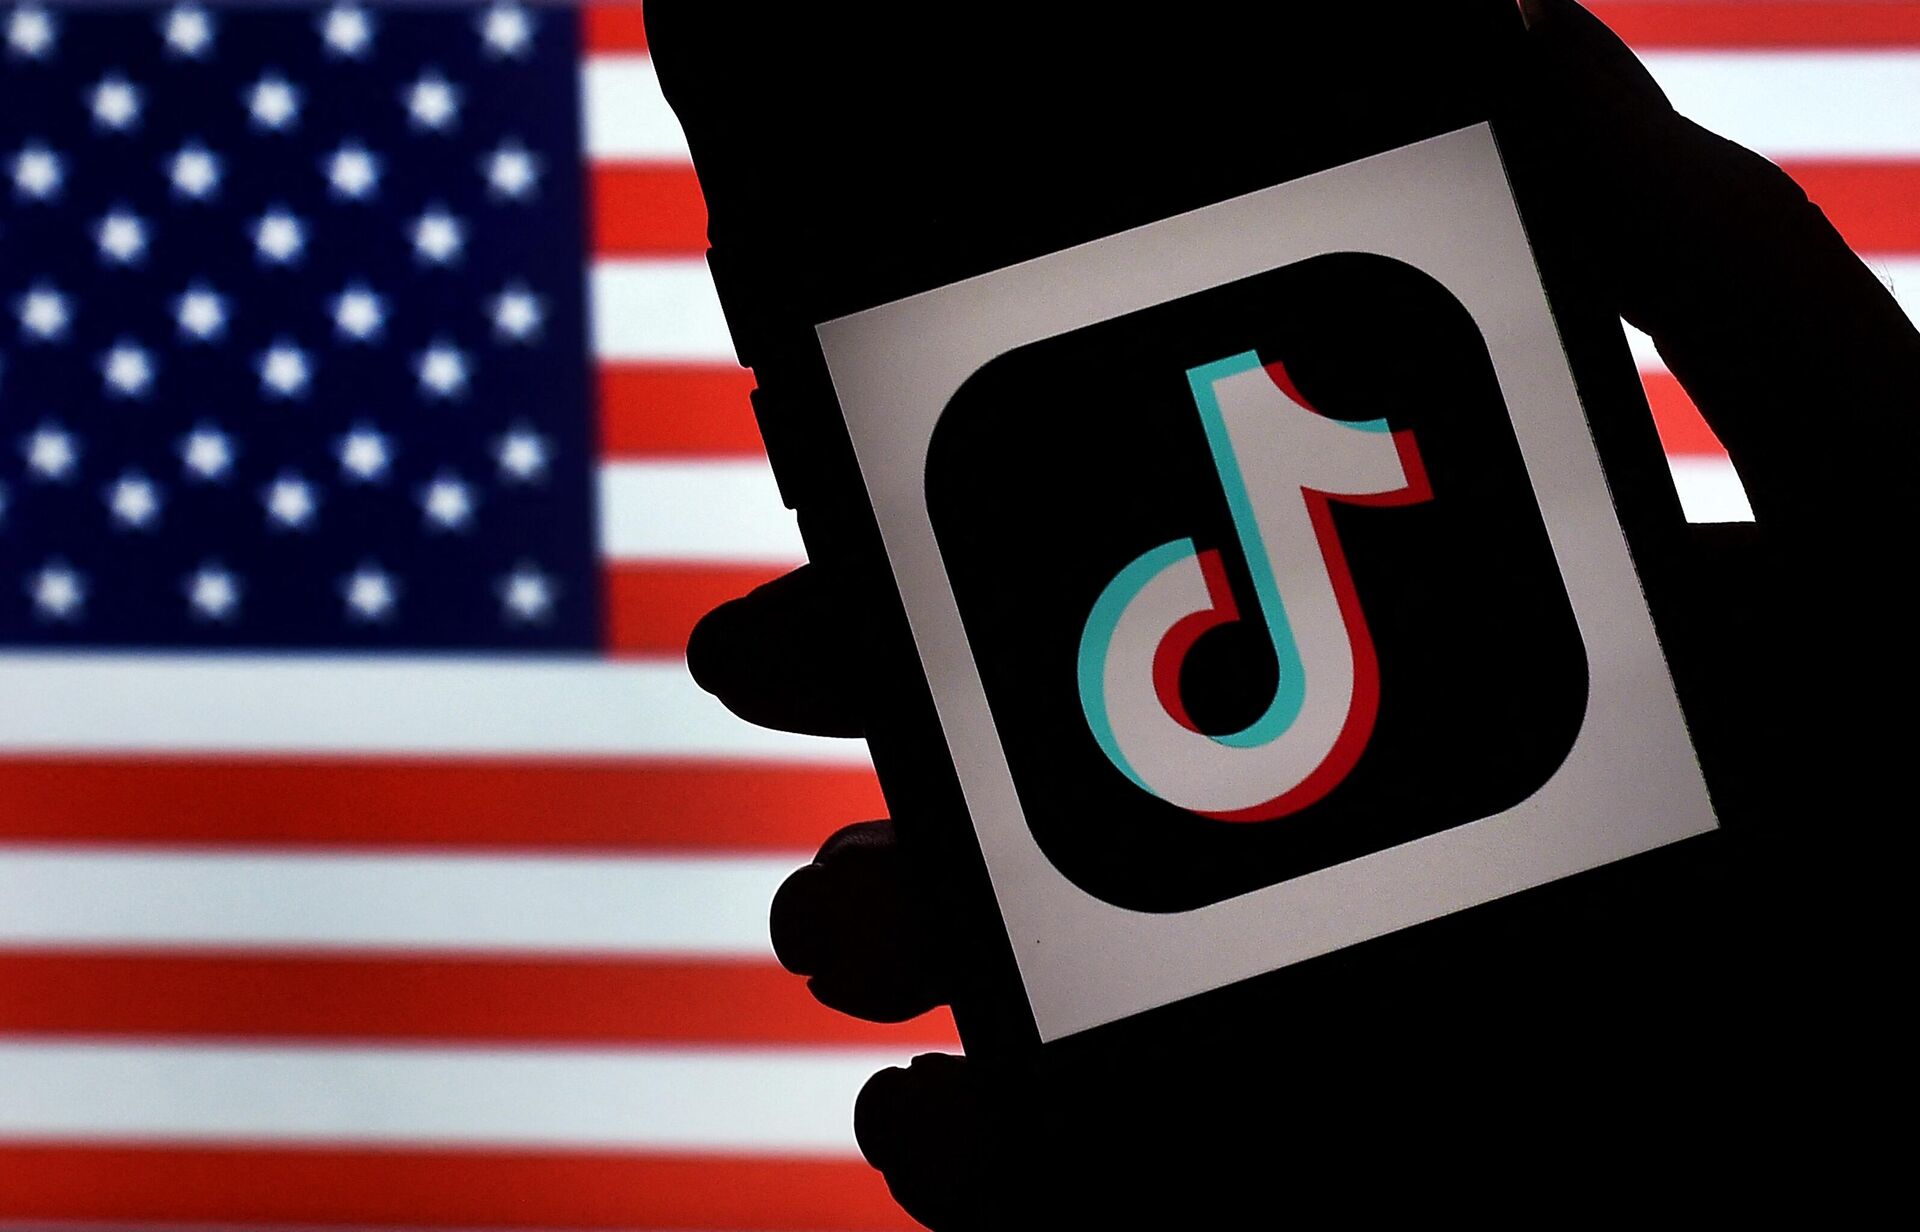 The social media application logo, TikTok is displayed on the screen of an iPhone on an American flag background.  - Sputnik International, 1920, 20.12.2022